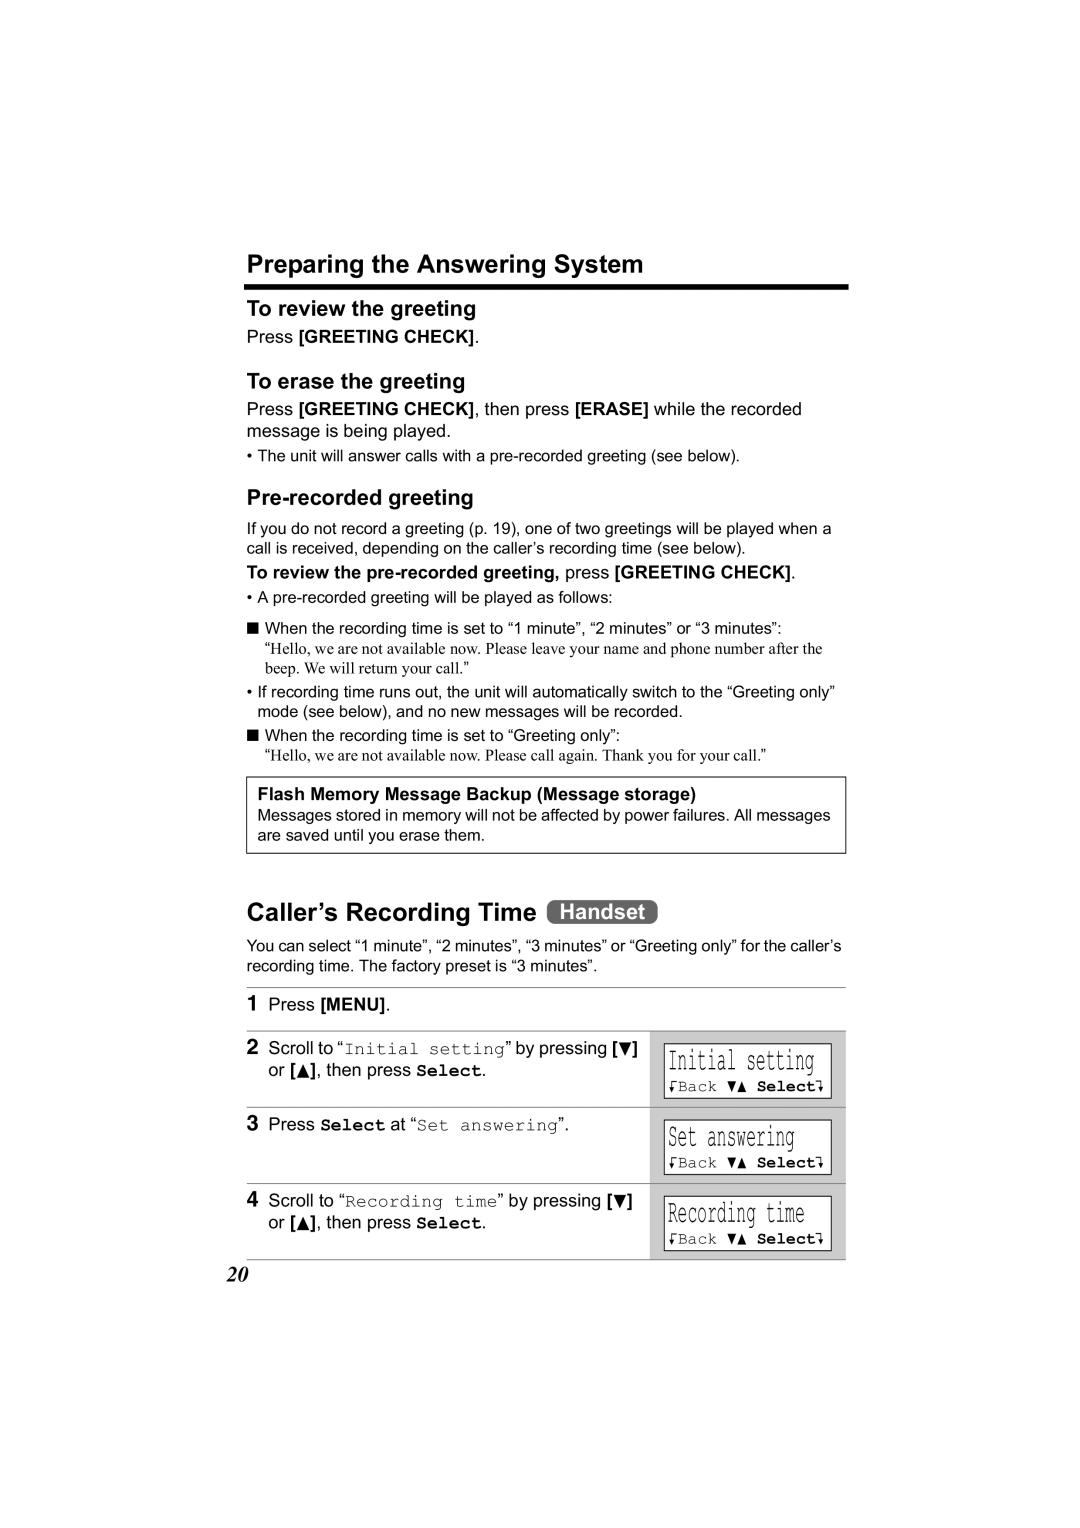 Panasonic KX-TG2344 manual Preparing the Answering System, Caller’s Recording Time Handset, To review the greeting 